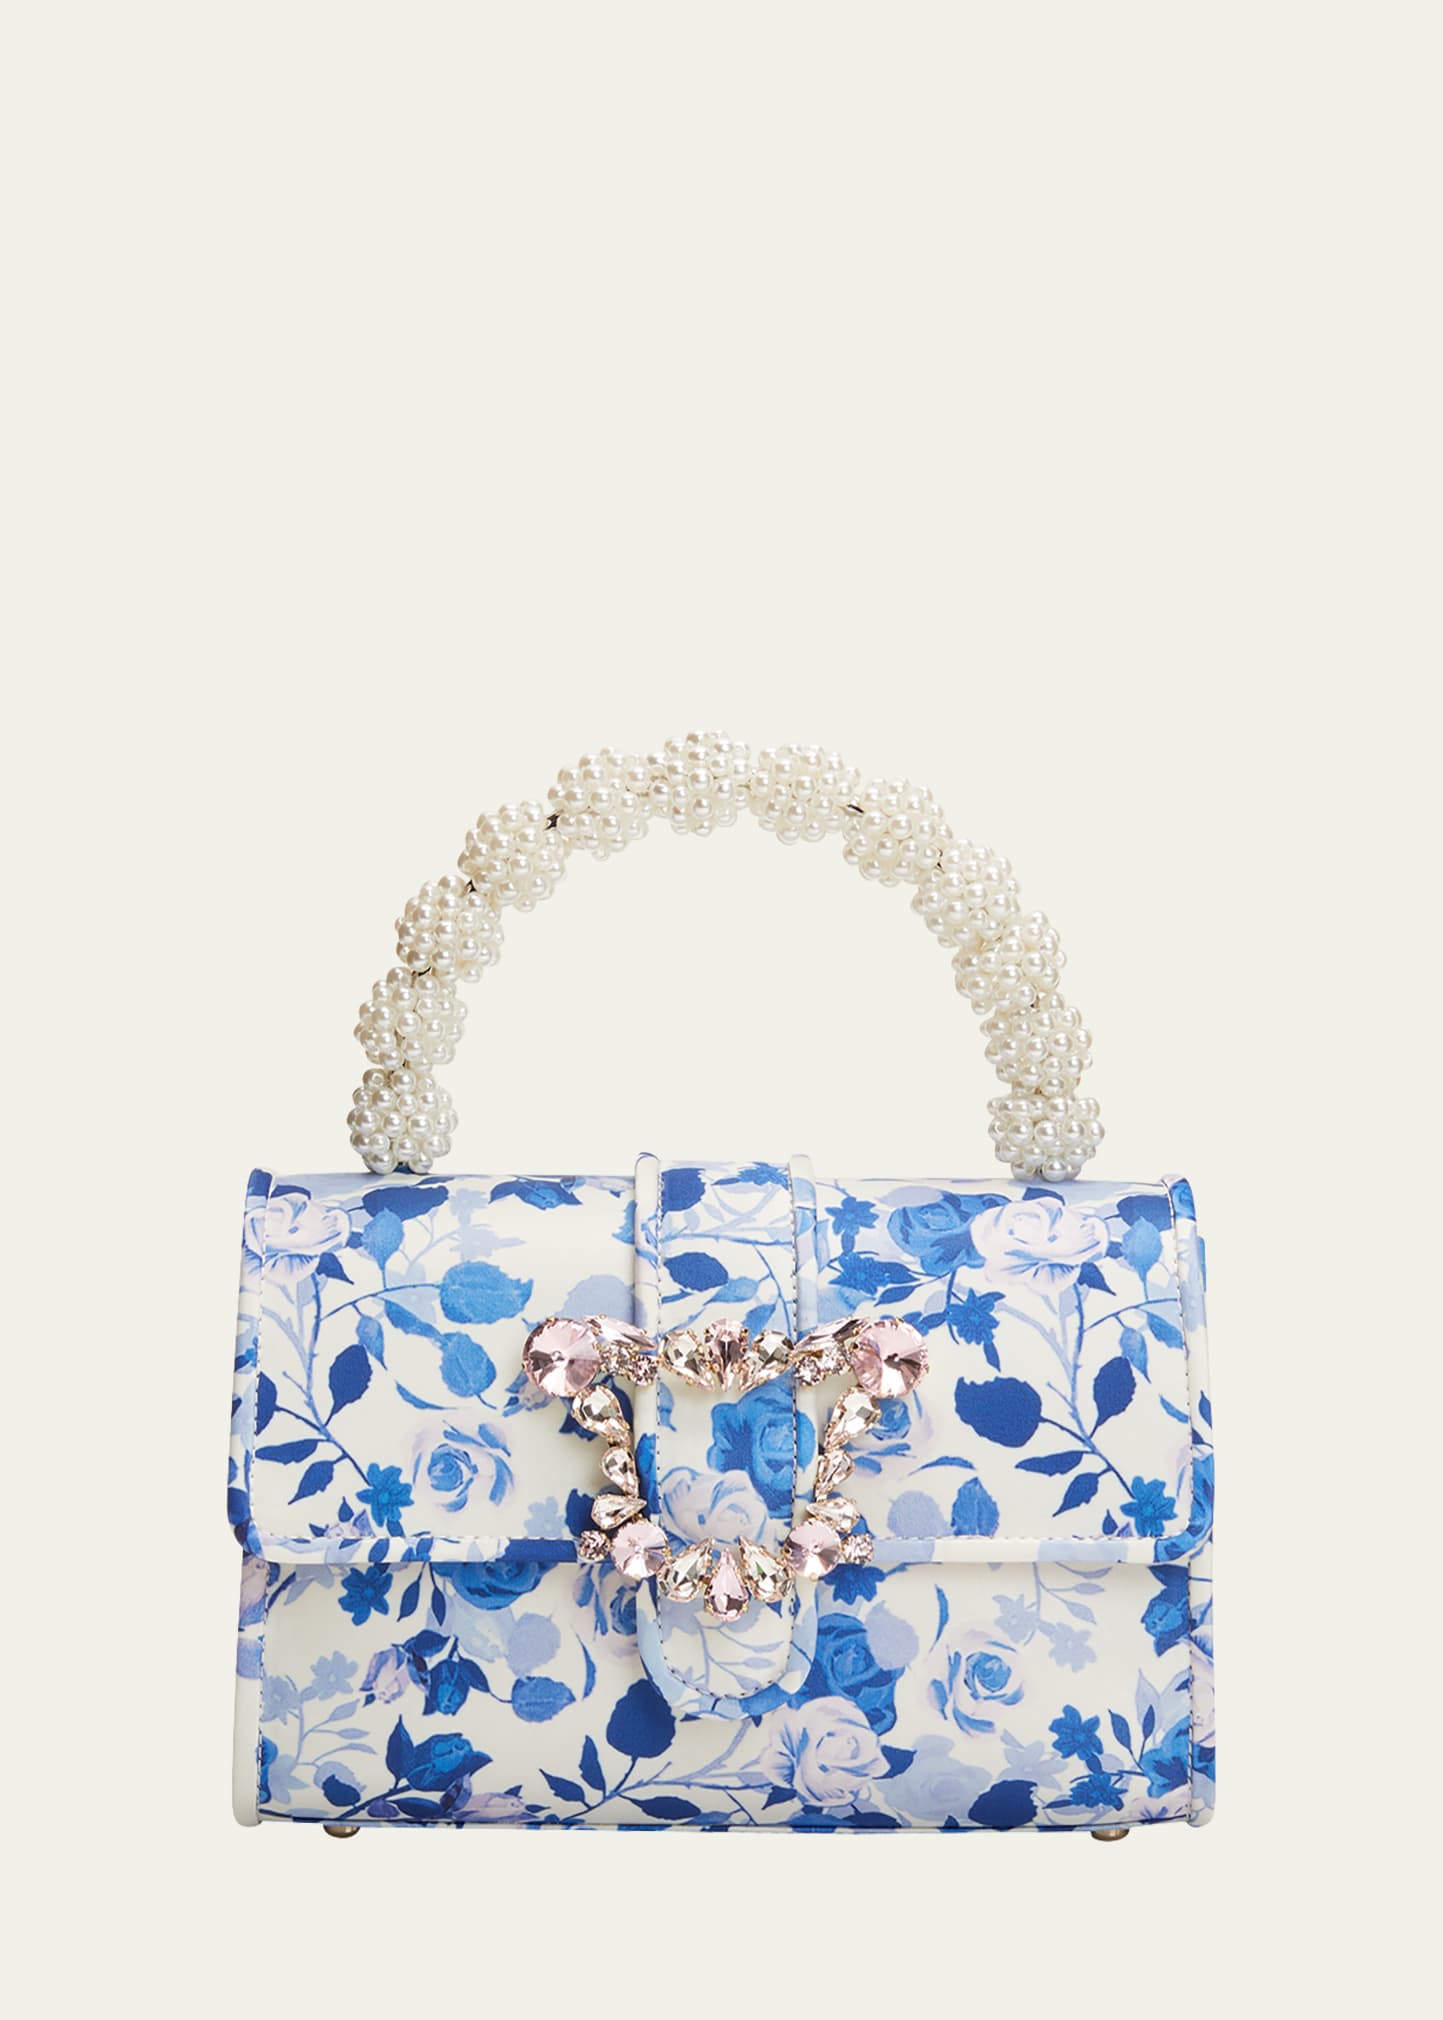 Sophia Webster Margaux Pearly Flower Top-handle Bag In Butterfly